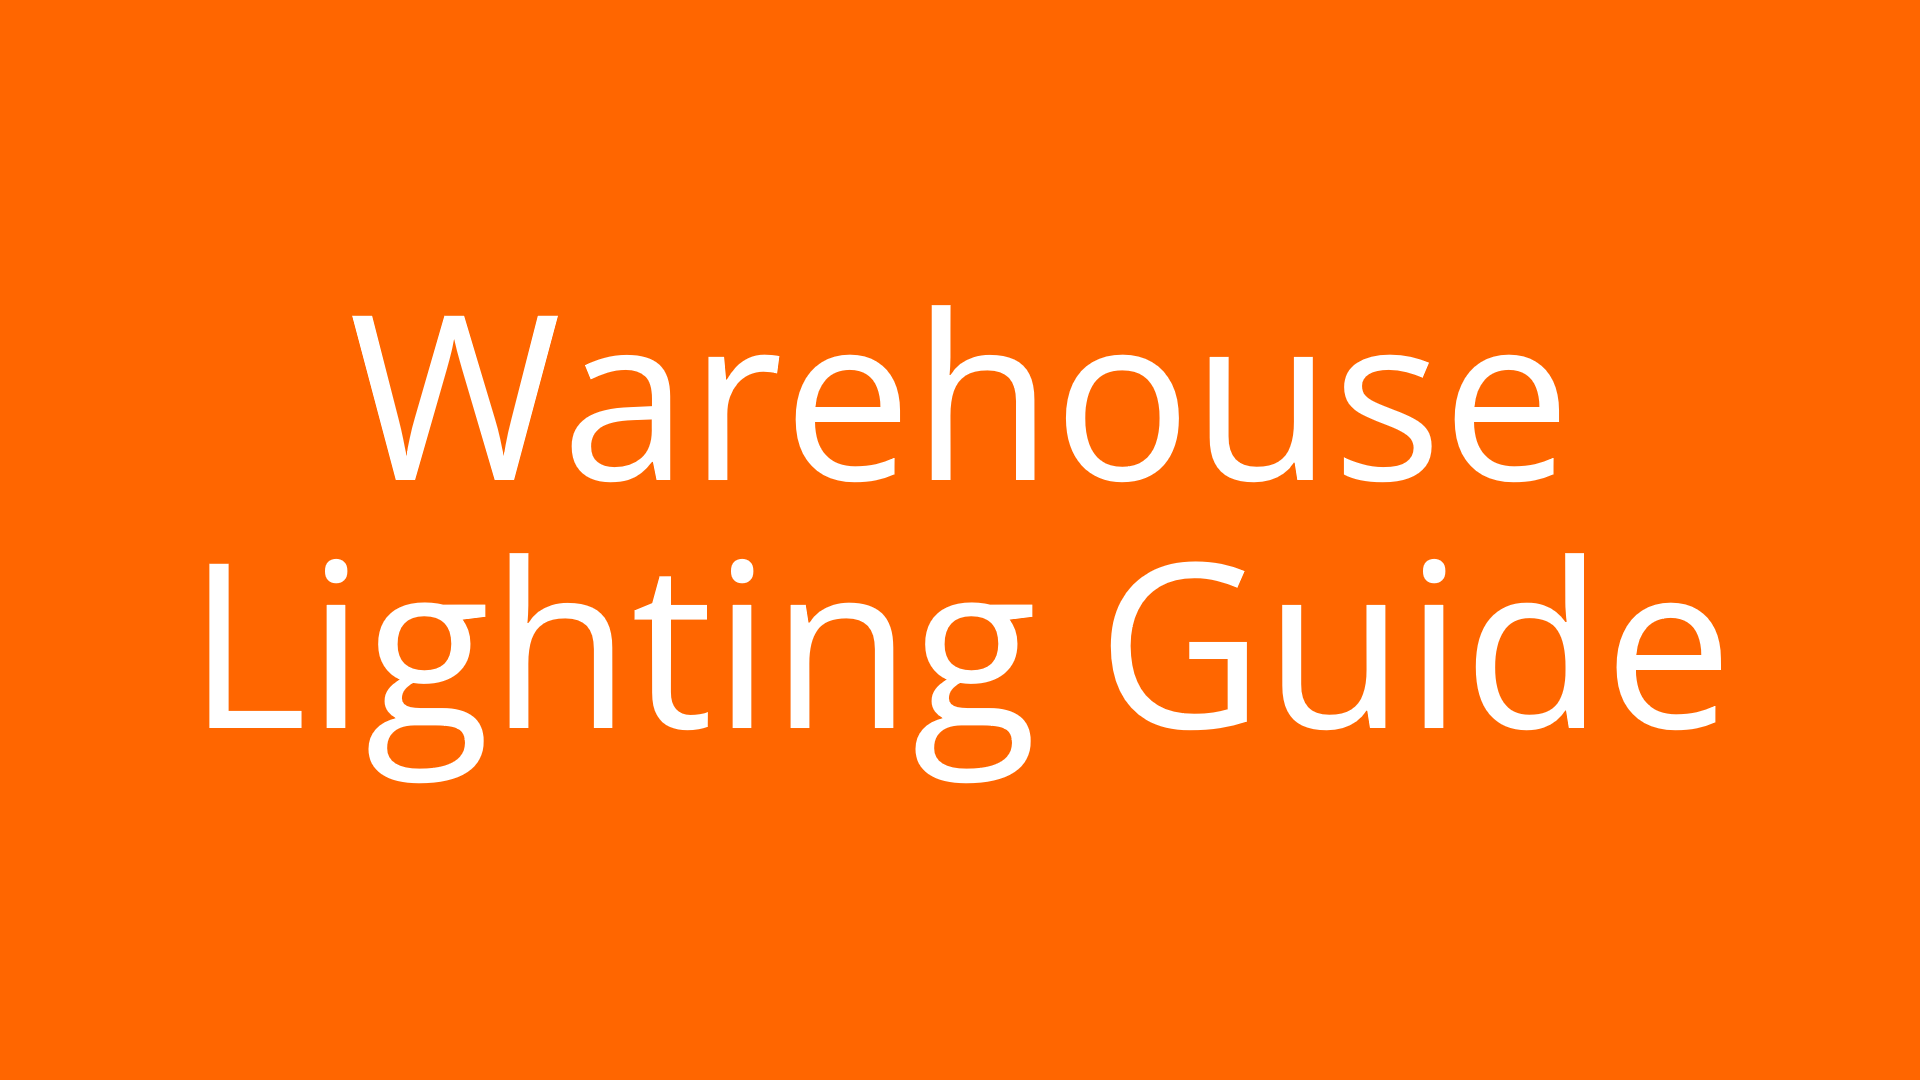 Warehouse Lighting Guide ​ - Things you need to know about